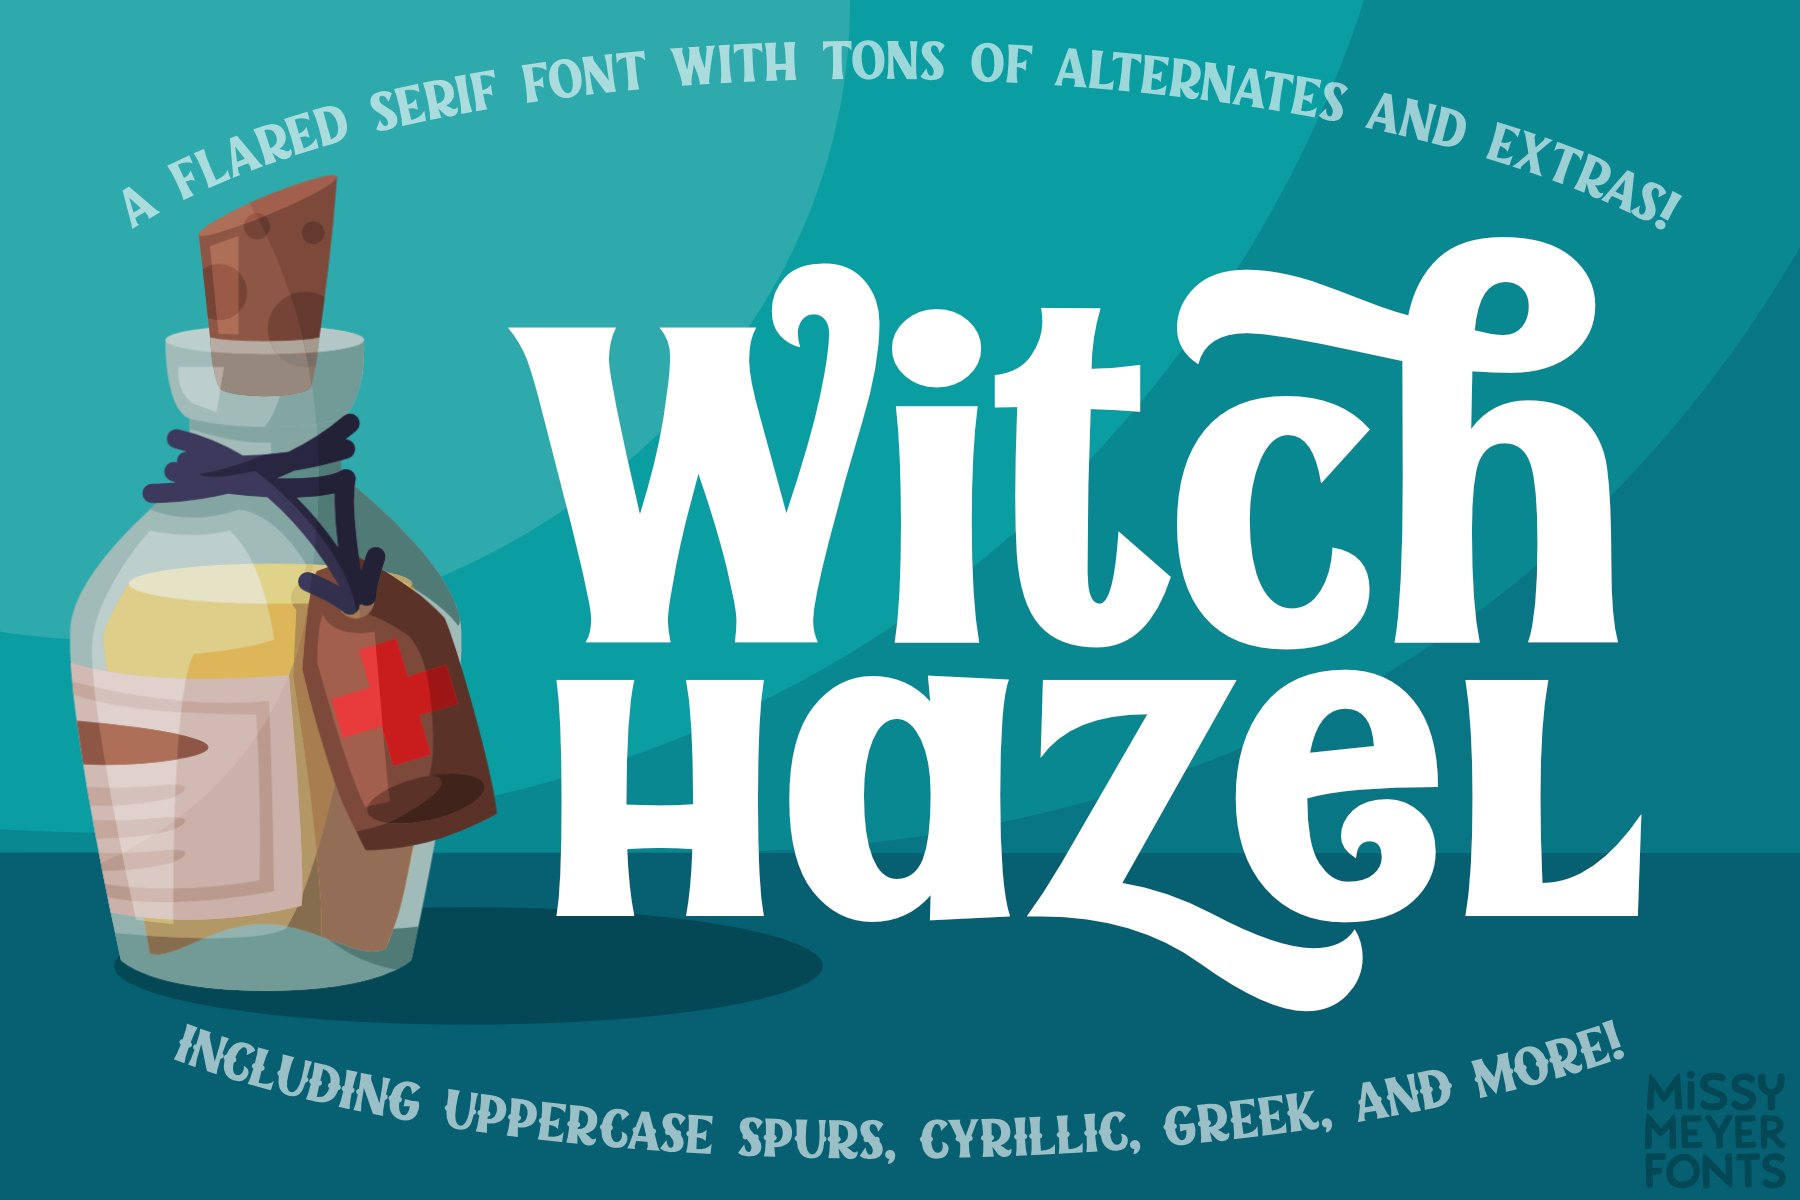 Witch Hazel: a flared serif font! cover image.